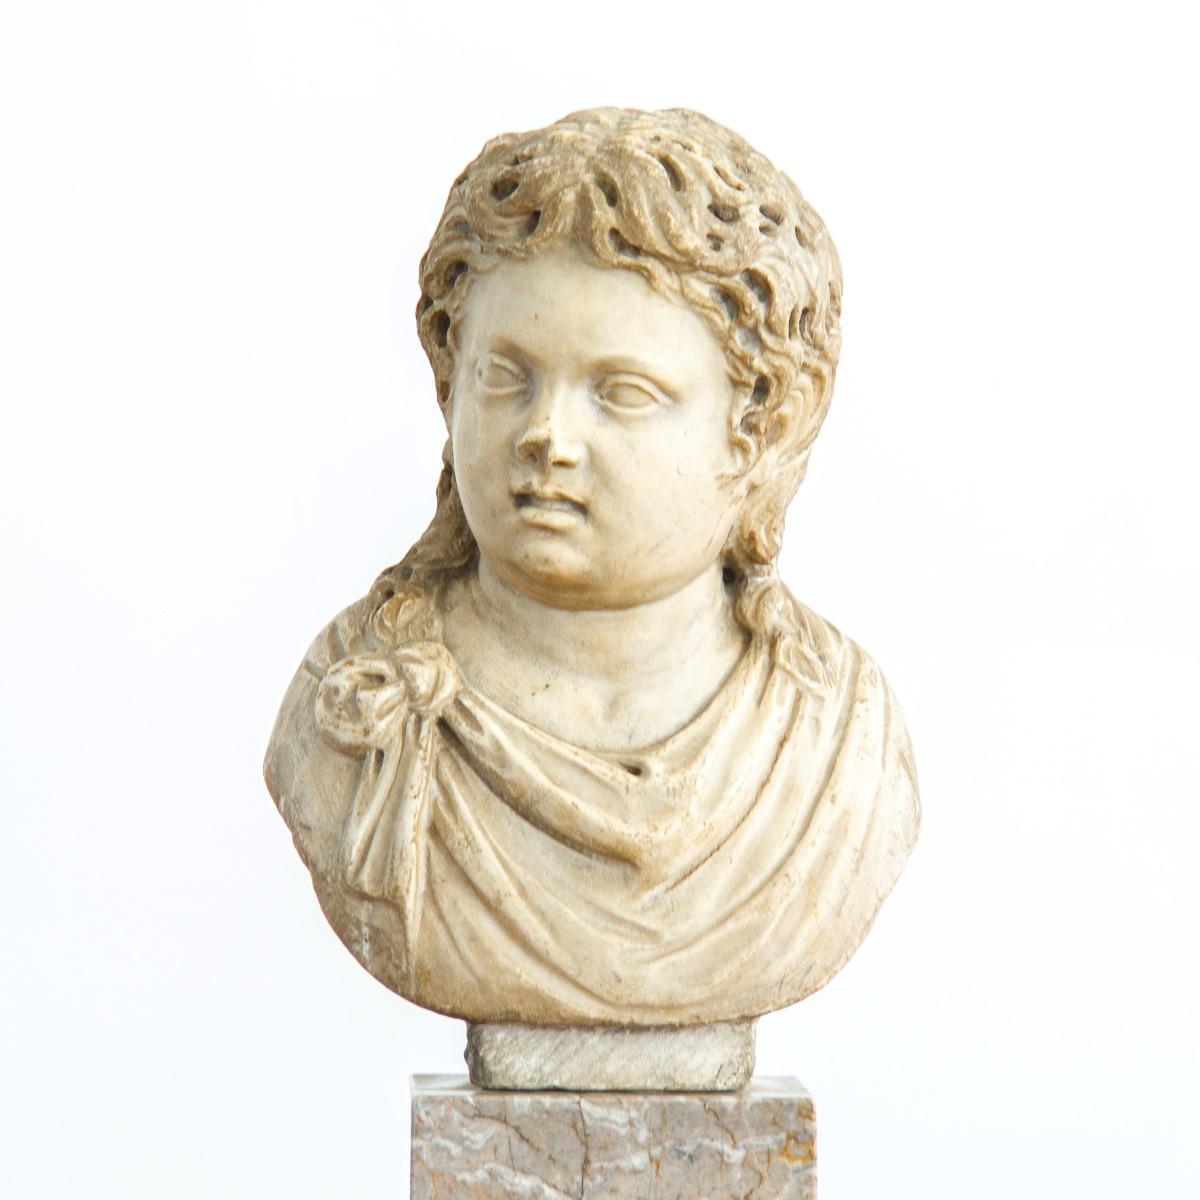 A 2nd century Roman bust of a young boy with curled long hair and classical dress. The nose is slightly preserved which adds to the busts character and is expected due to the age. The bust has its own socle which has been mounted on a younger marble